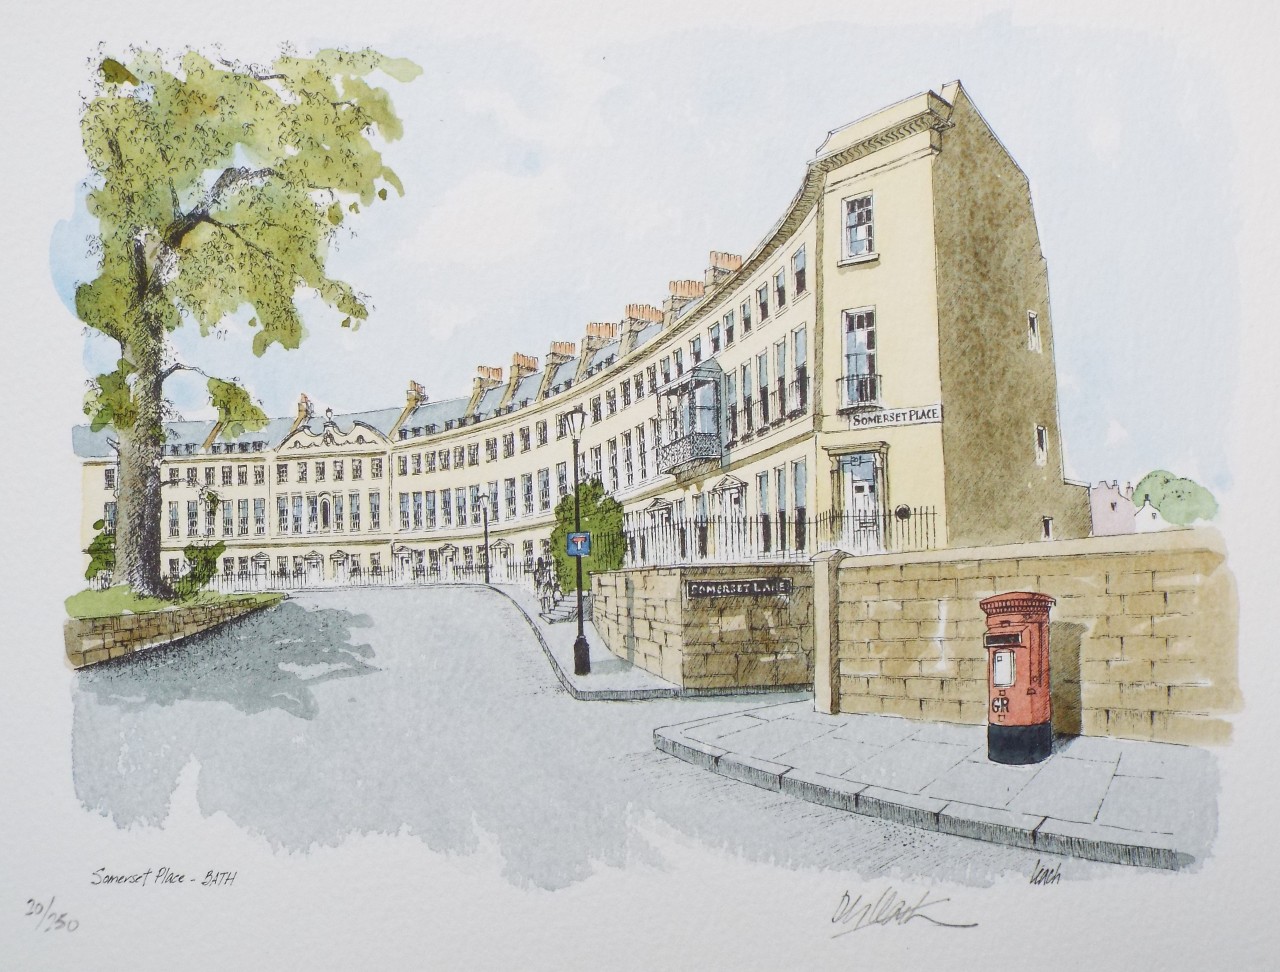 Giclee print with hand colour - Somerset Place - Bath